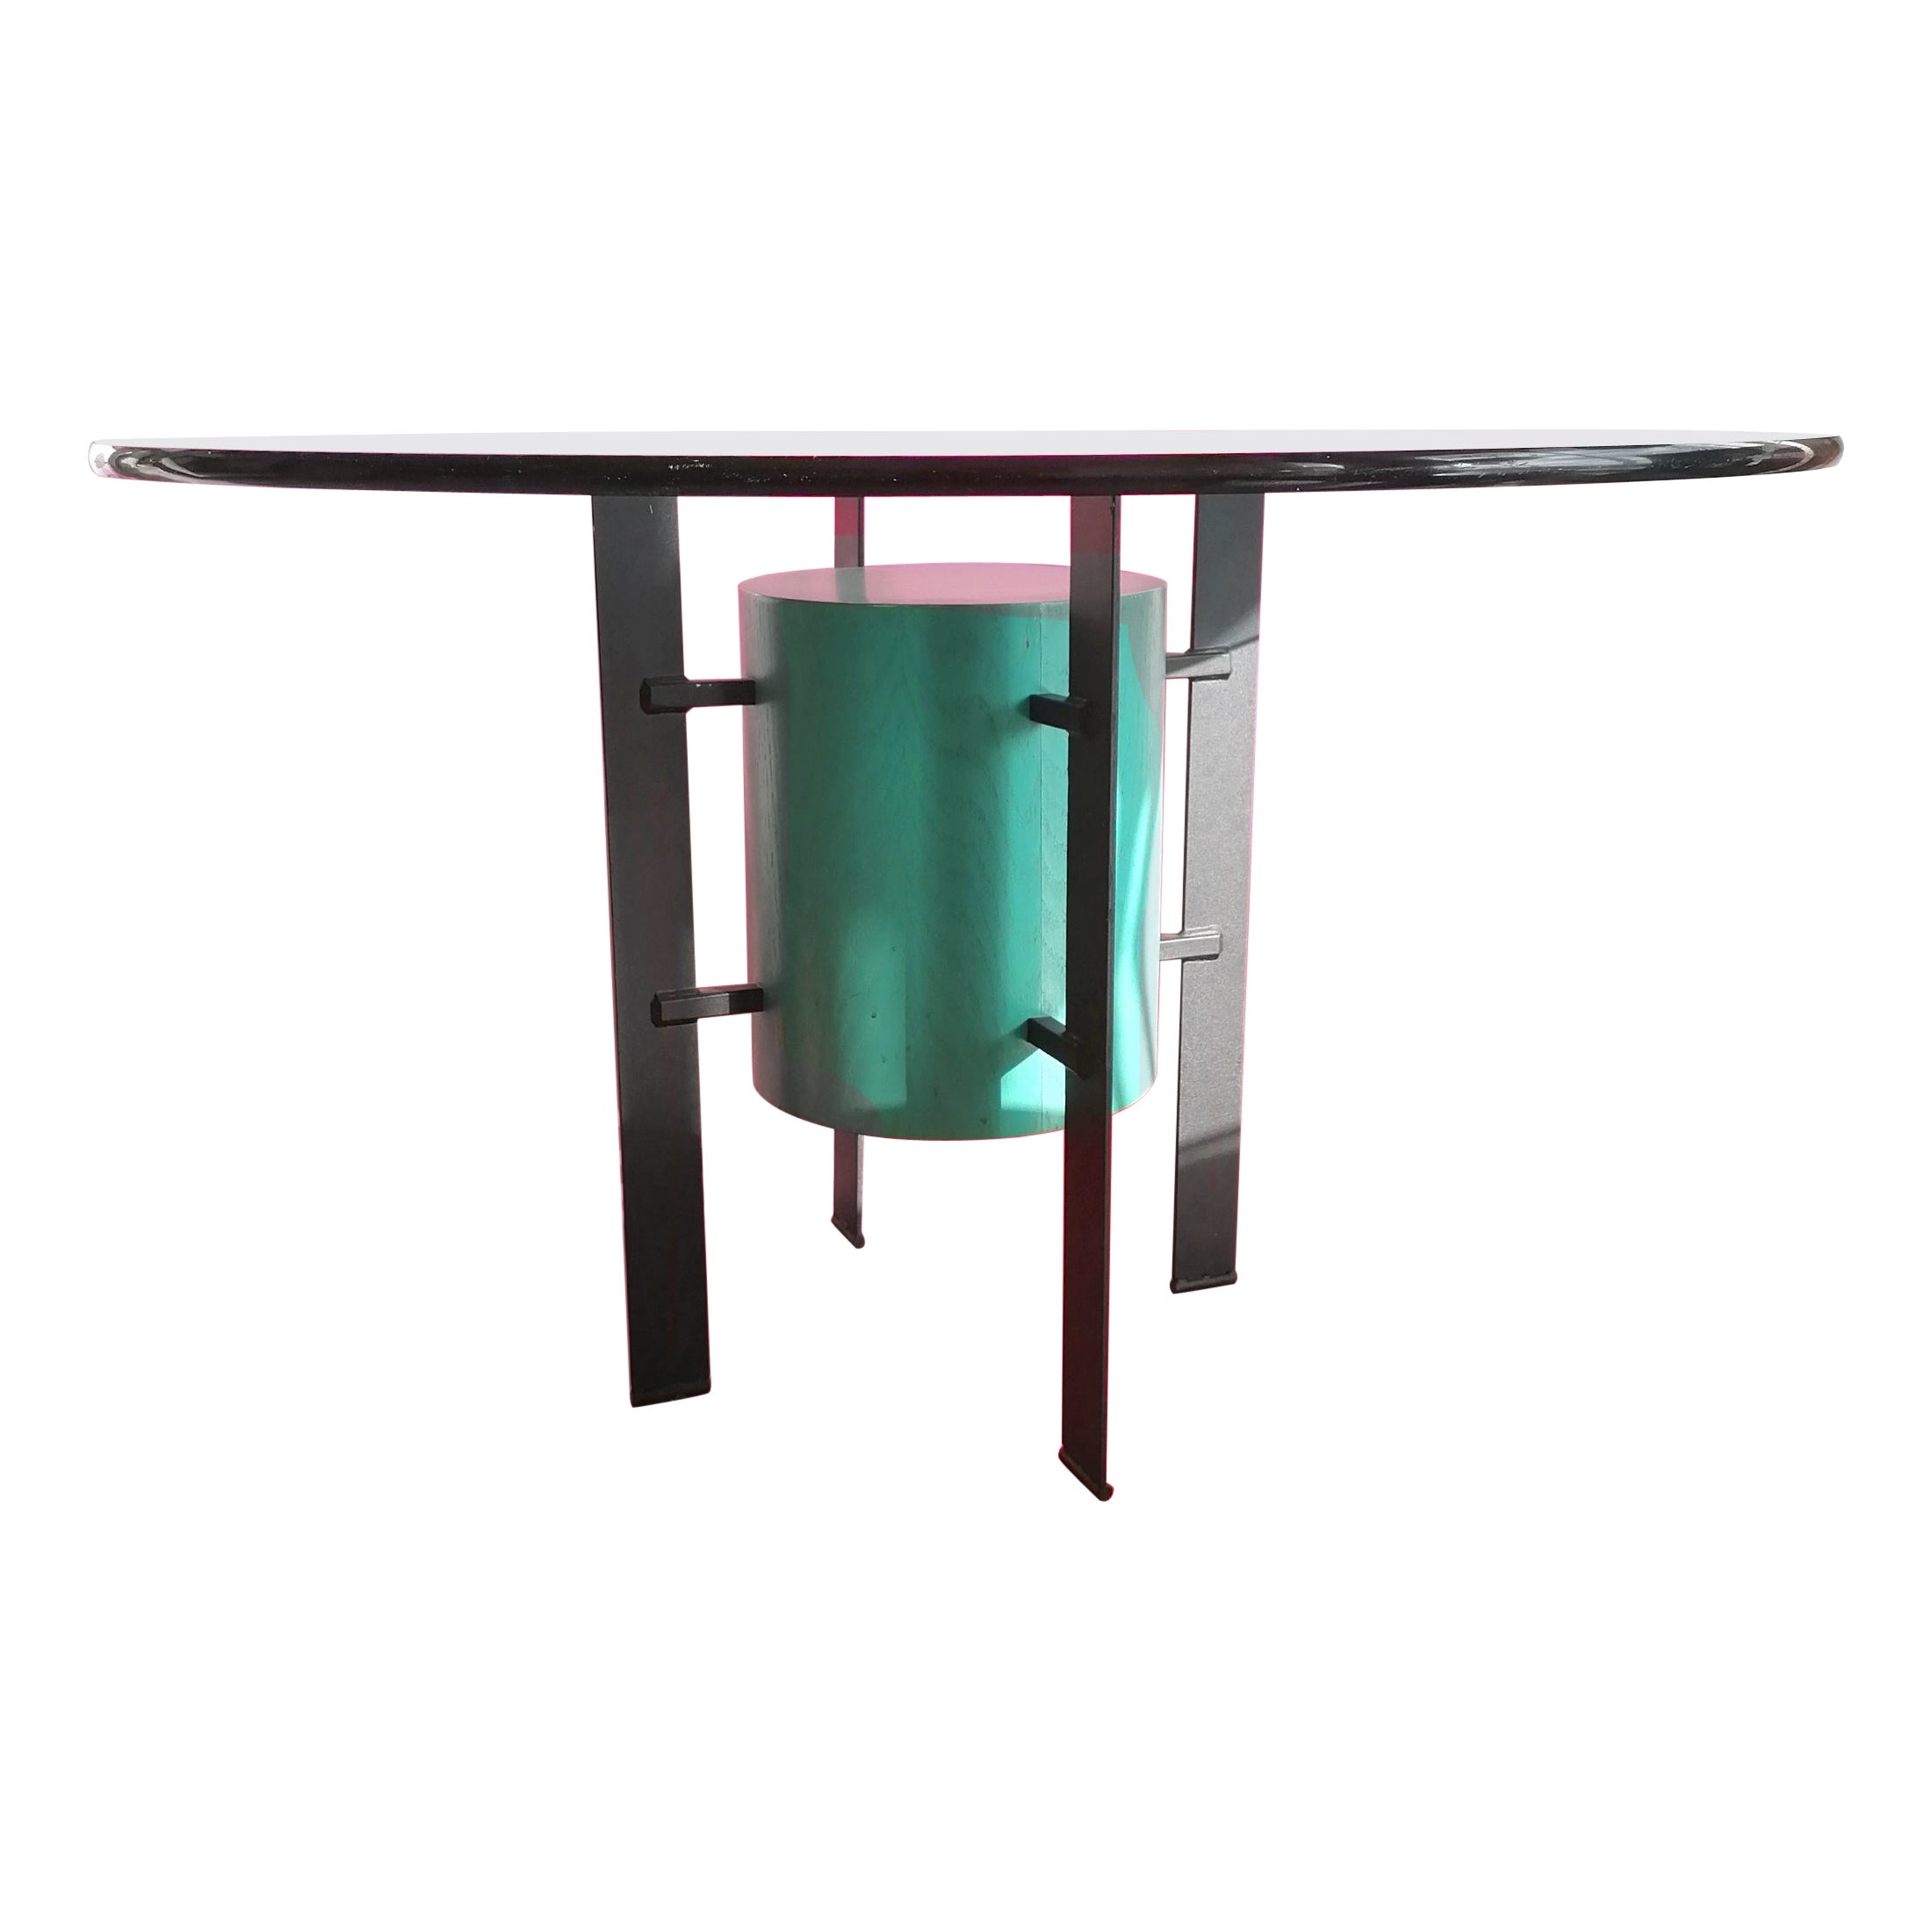 Postmodern Memphis Style Iron, Glass & Plywood Dining Table, USA, 1980s For Sale